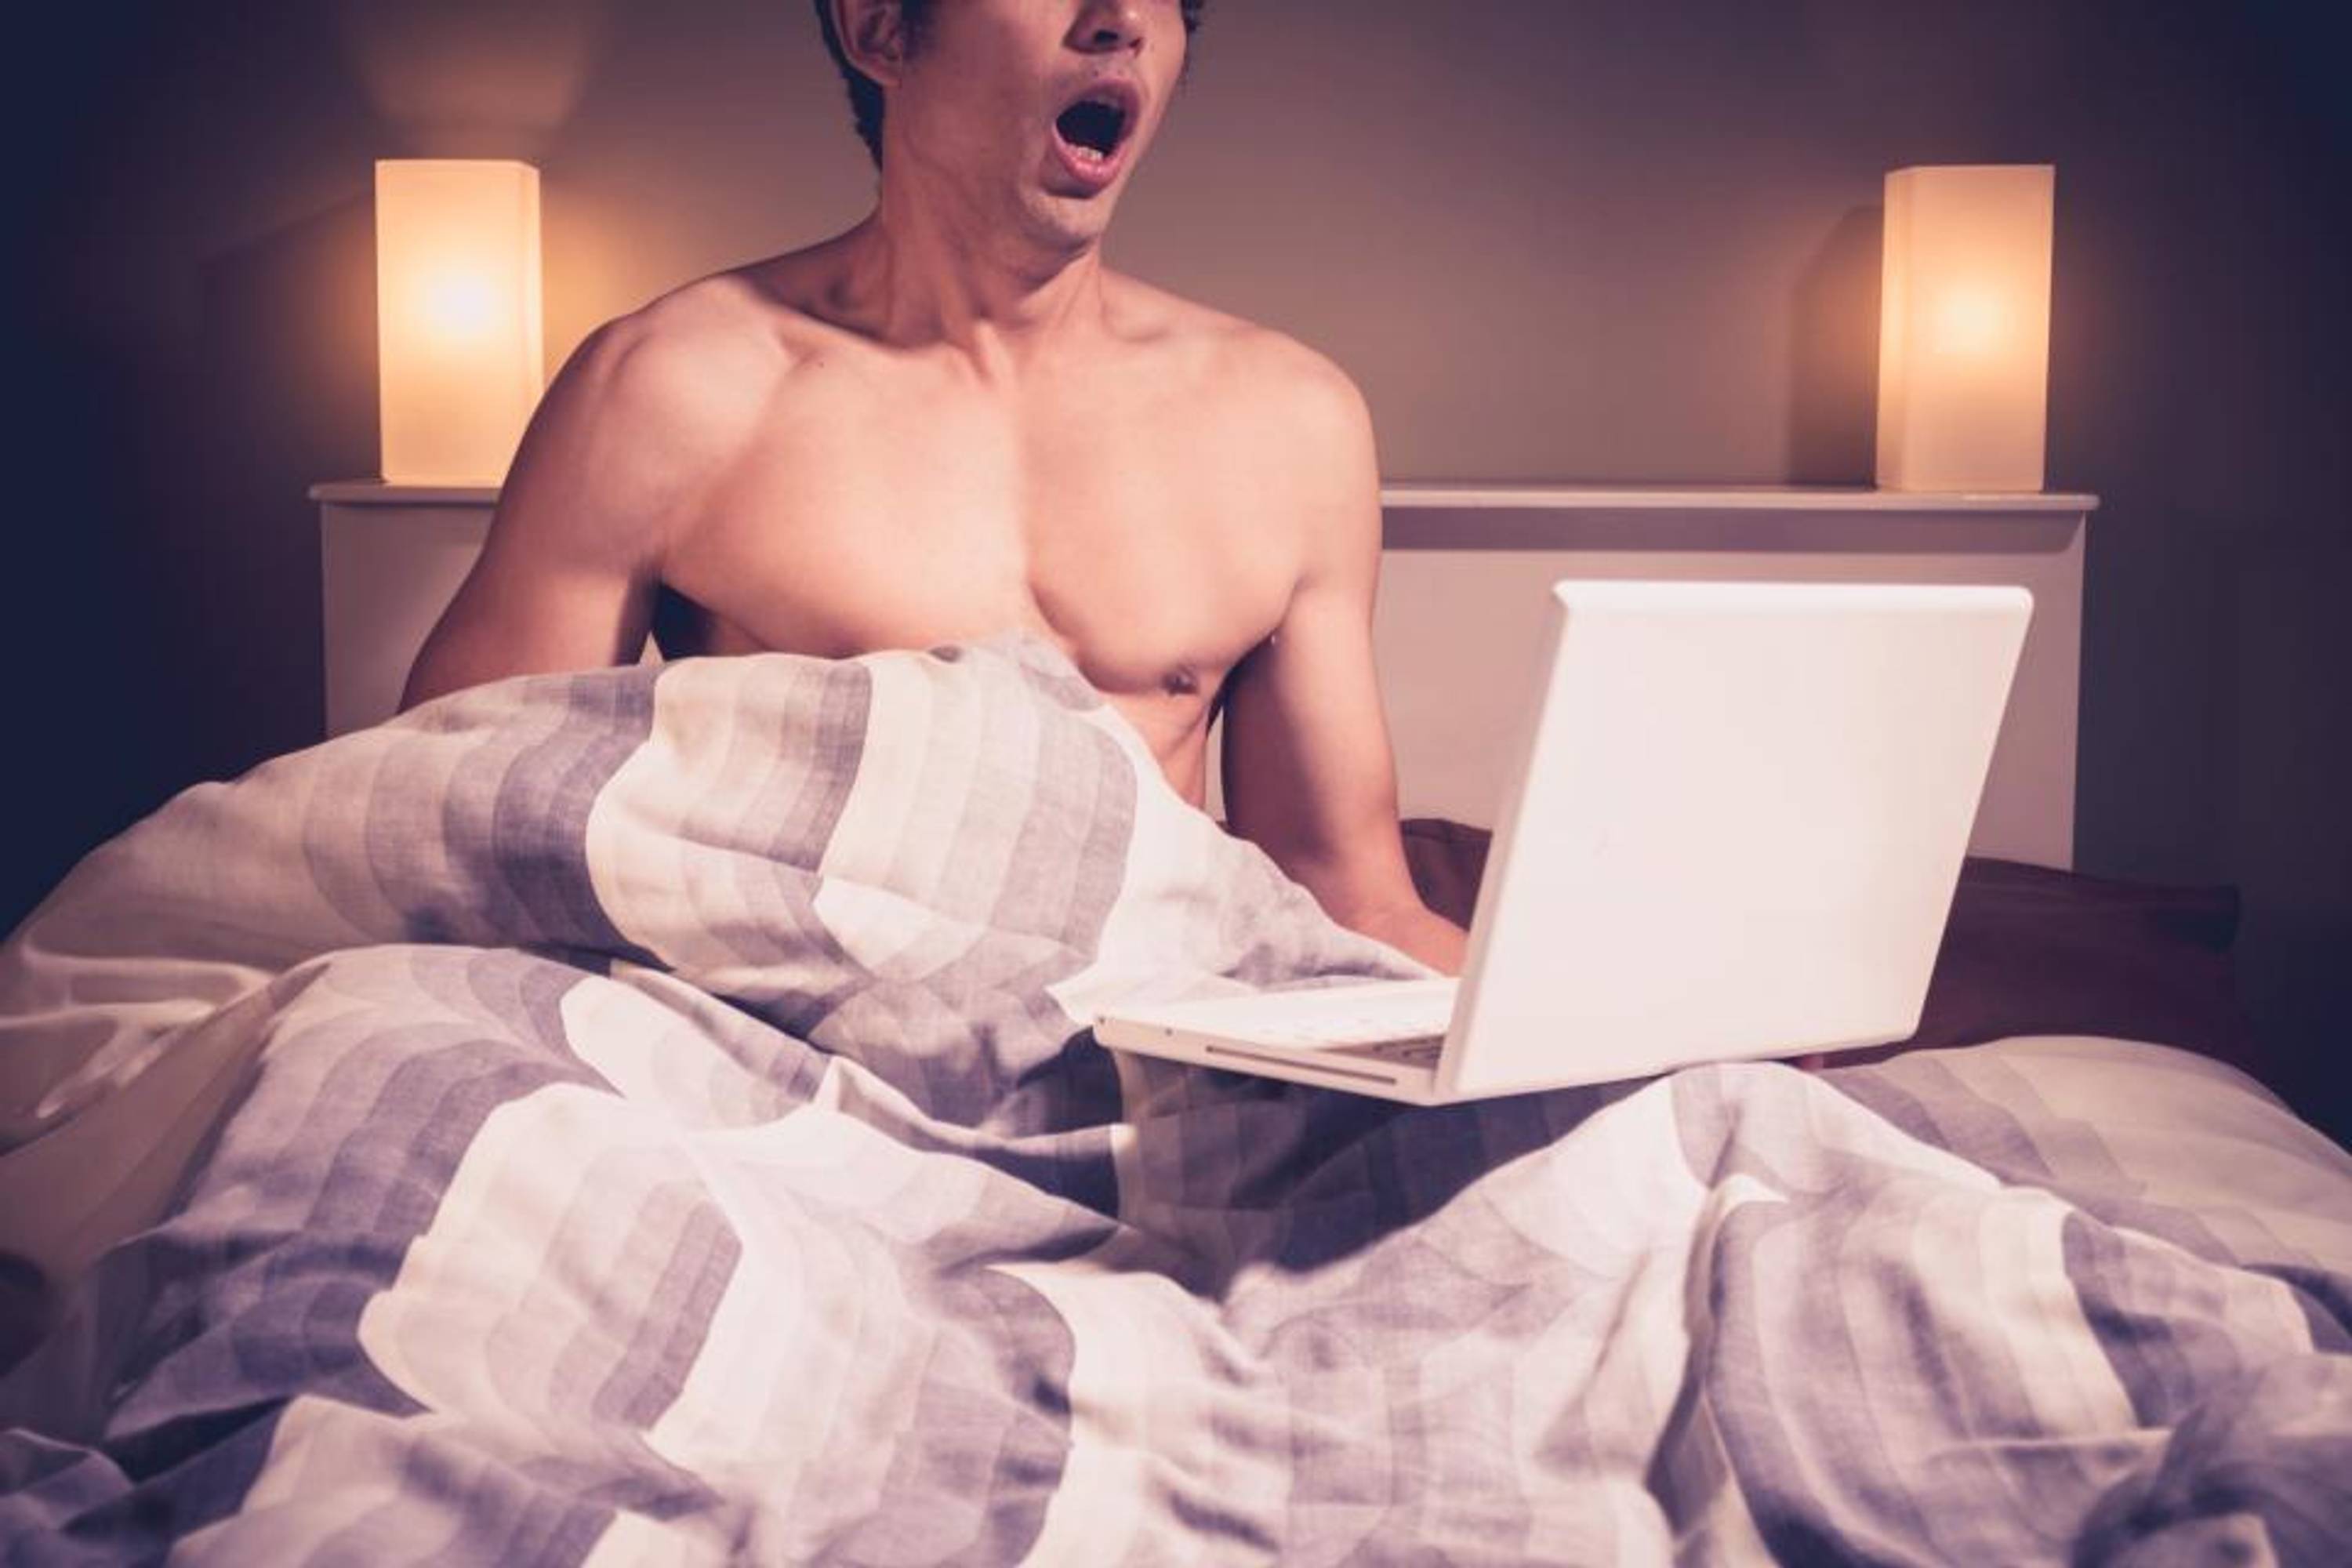 Hardcore Watching Porn - Is It Normal To Watch Porn? | Ecohustler